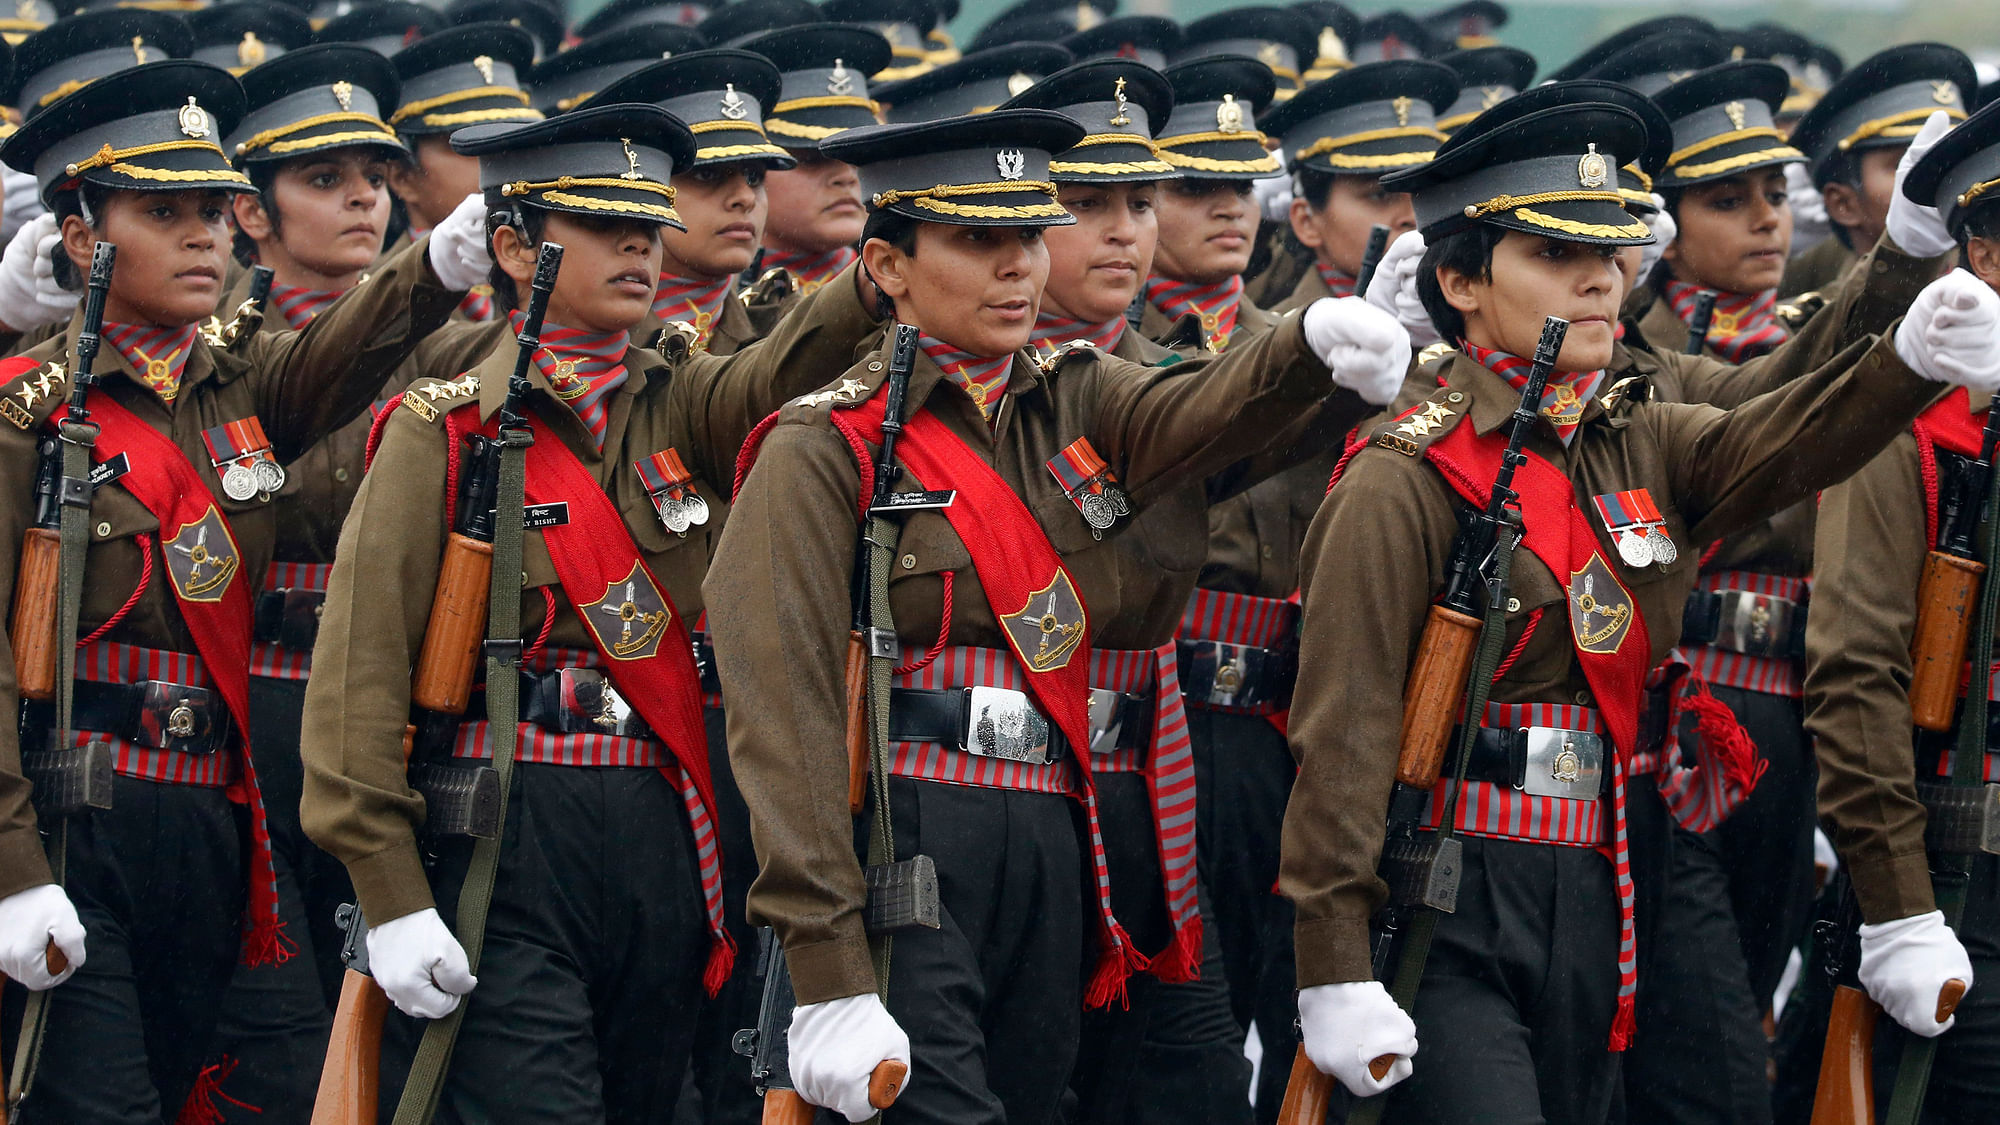 An all female military contingent marches in the Republic Day parade in New Delhi on January 26, 2015. (Photo: Reuters)